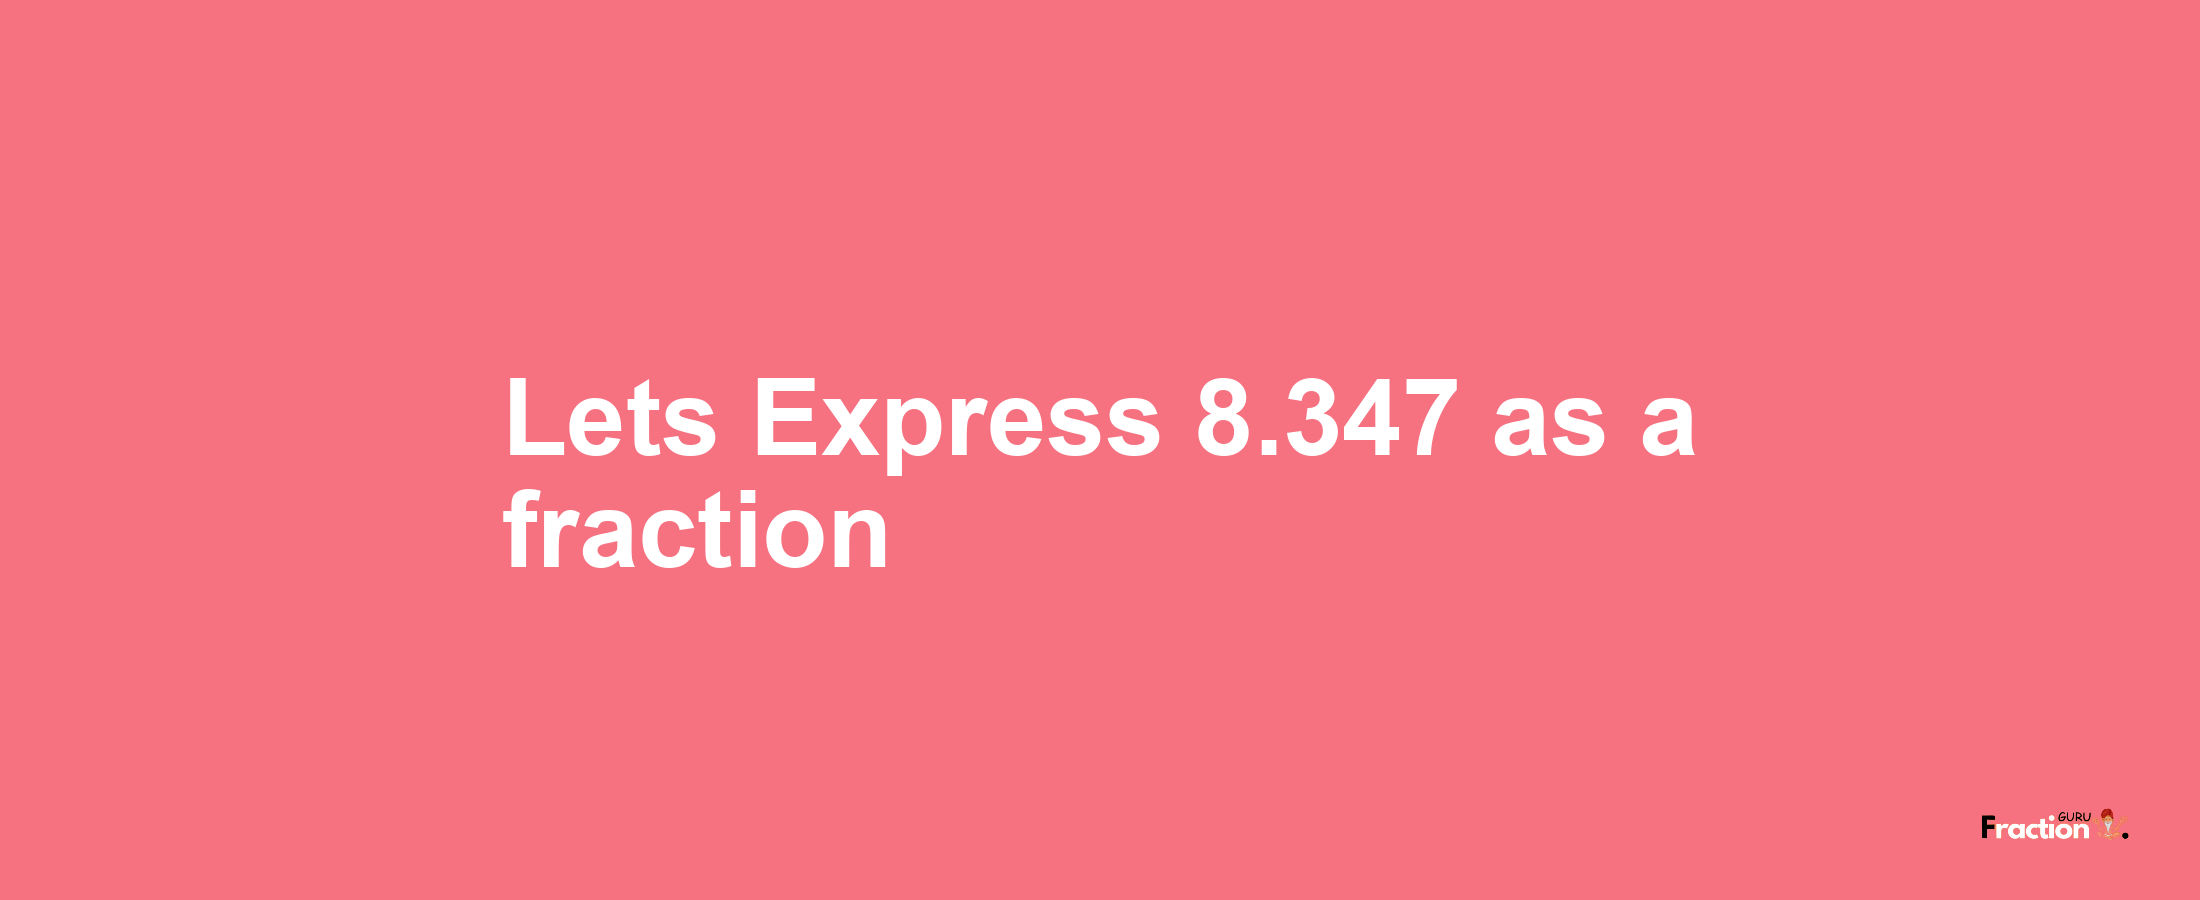 Lets Express 8.347 as afraction